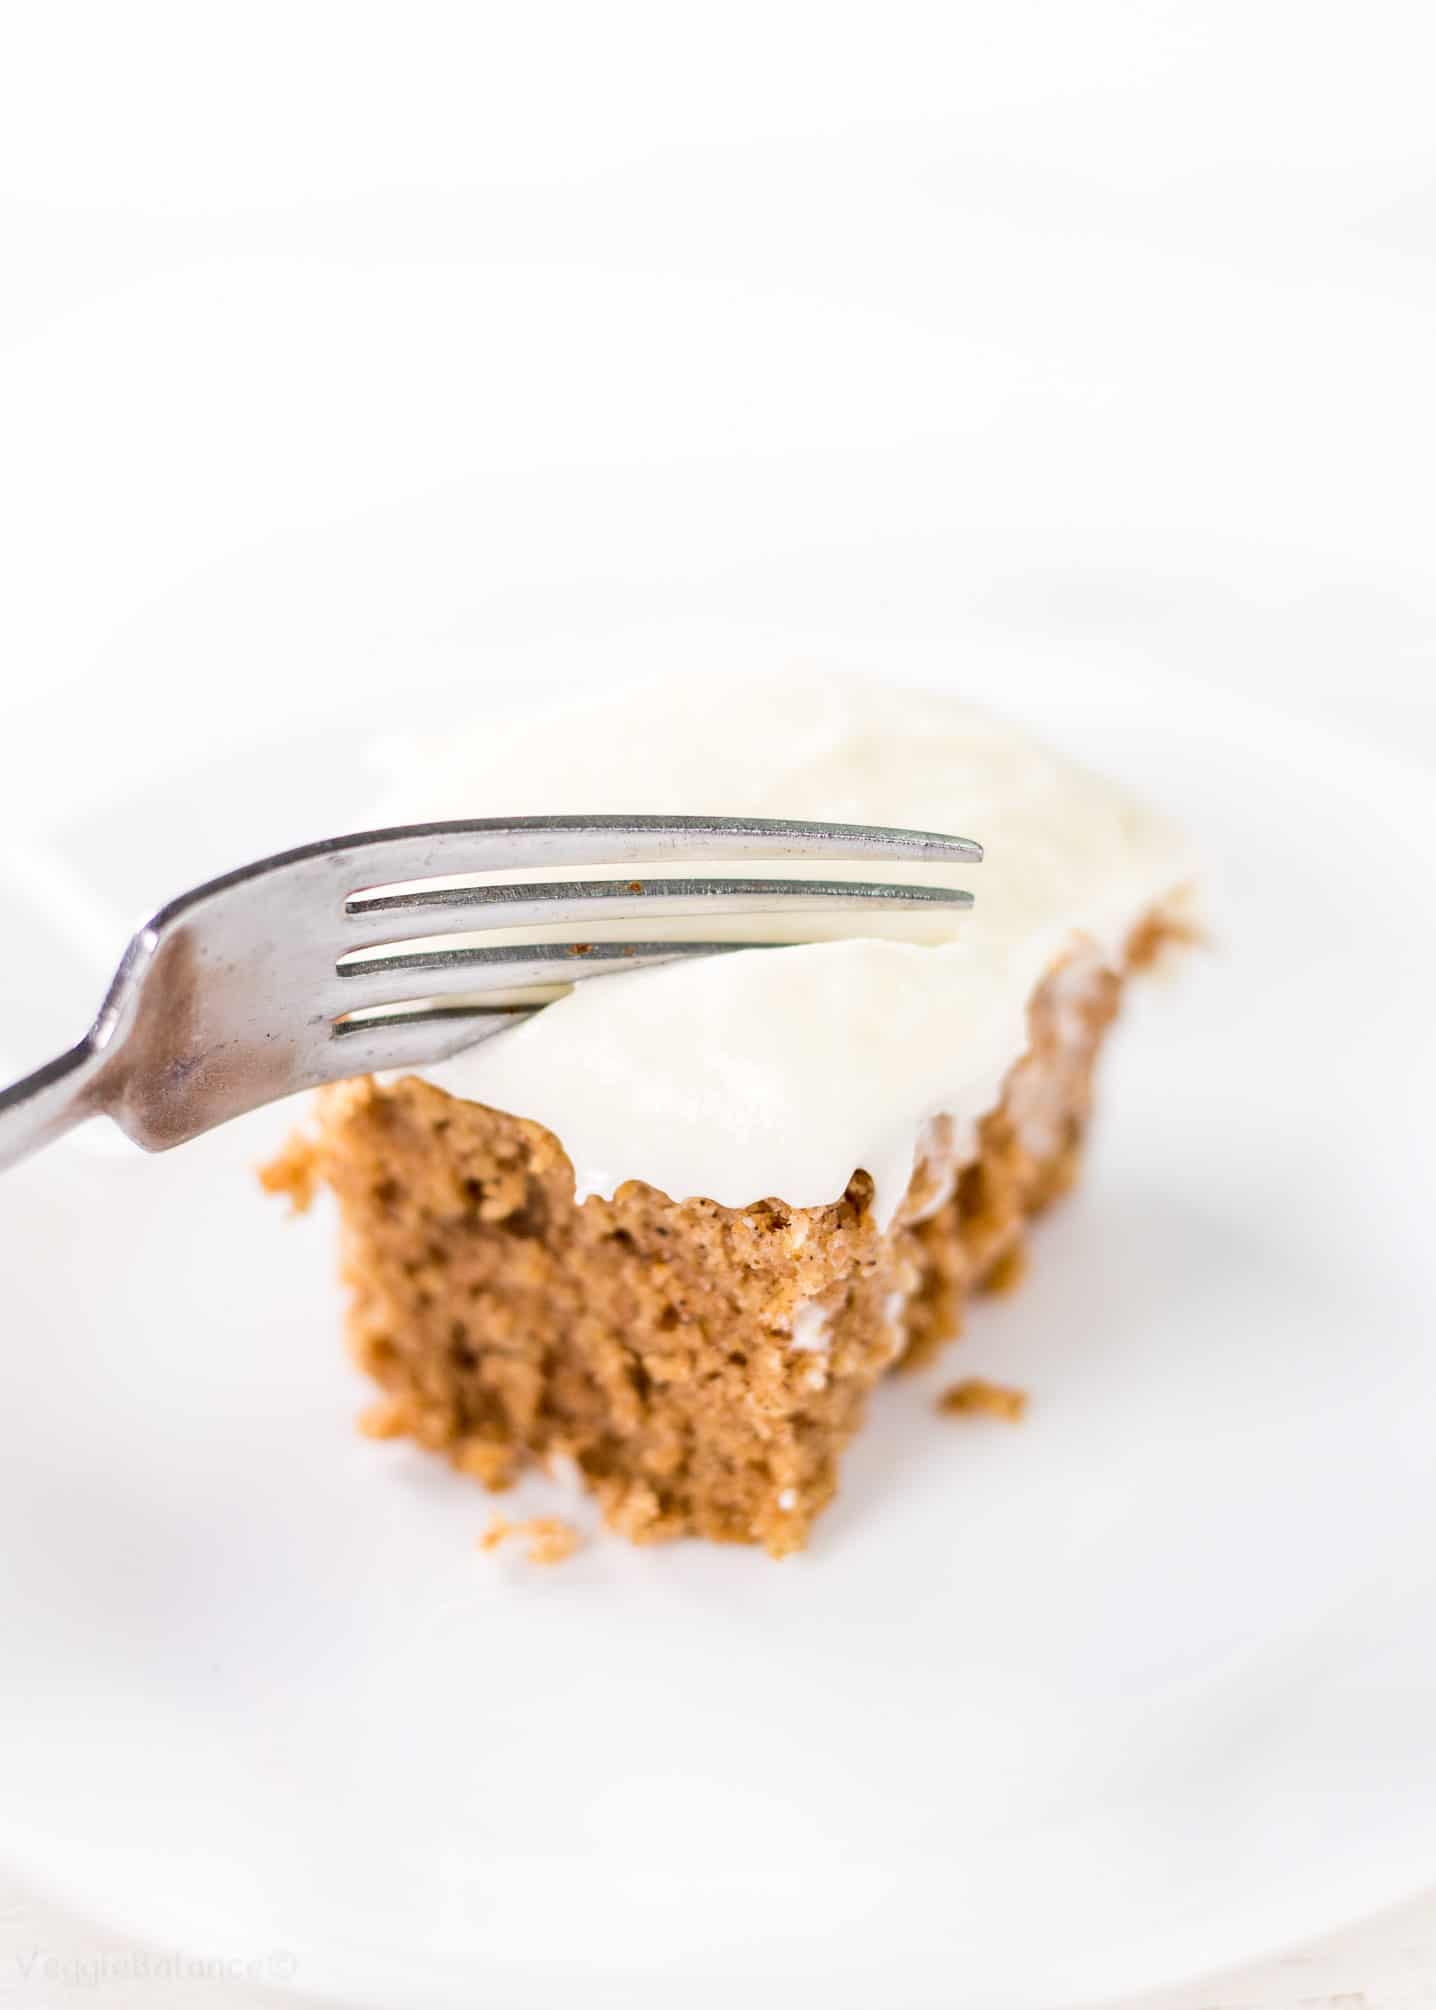 Applesauce Spice Cake With Cream Cheese Frosting Recipe